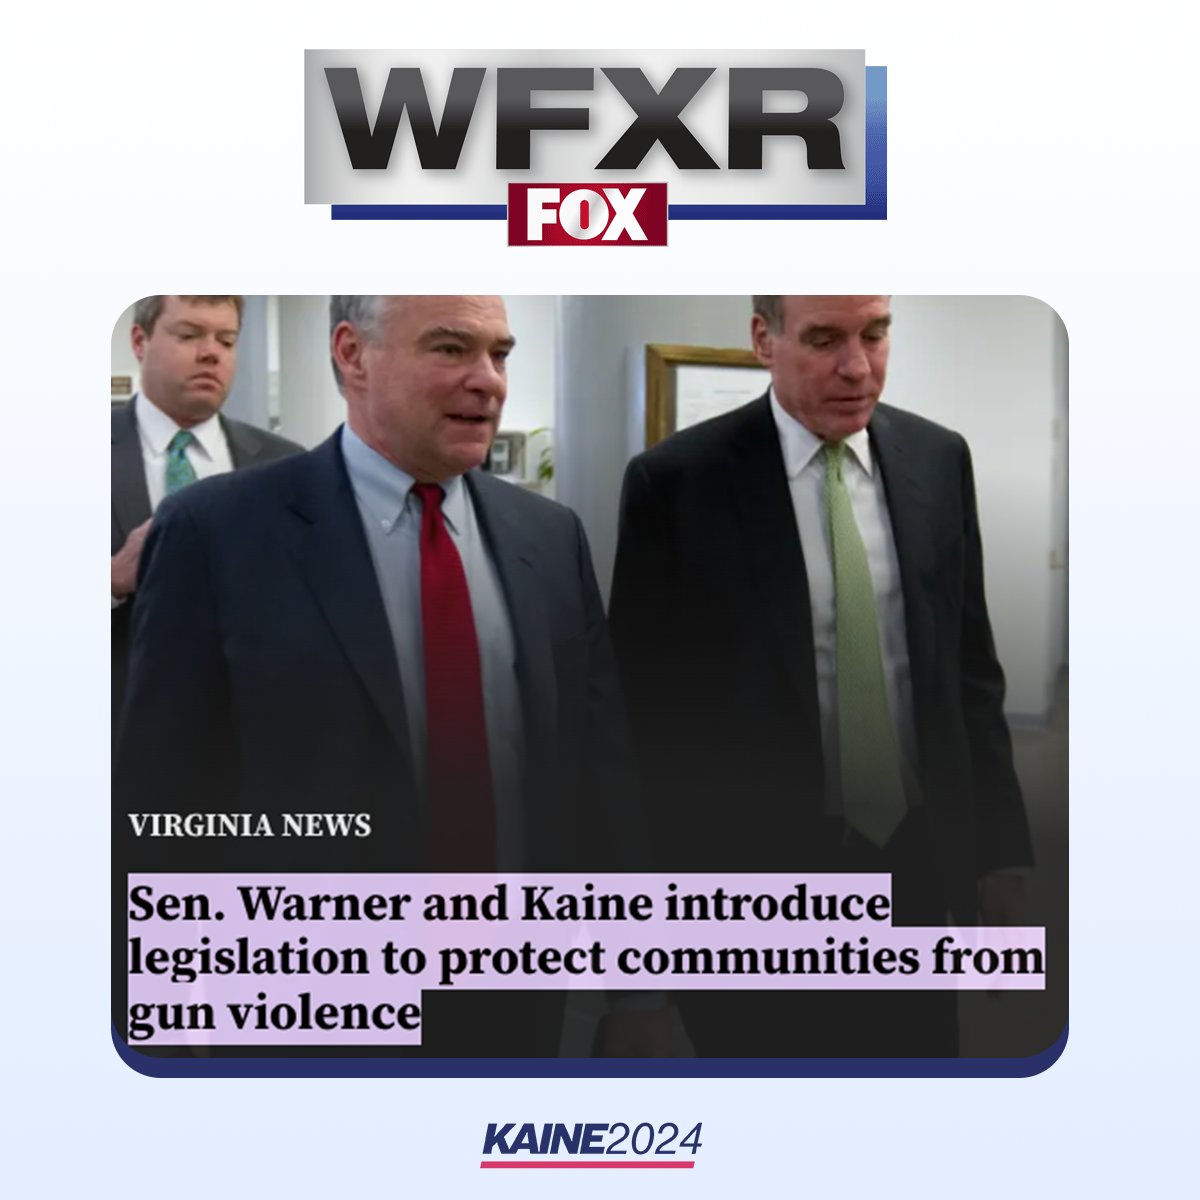 Under @JoeBiden’s leadership, we passed historic gun safety legislation—but there’s more we must do to keep people safe. My legislation would build on Virginia’s gun safety laws at the federal level. Let’s get this passed. wfxrtv.com/news/regional-…